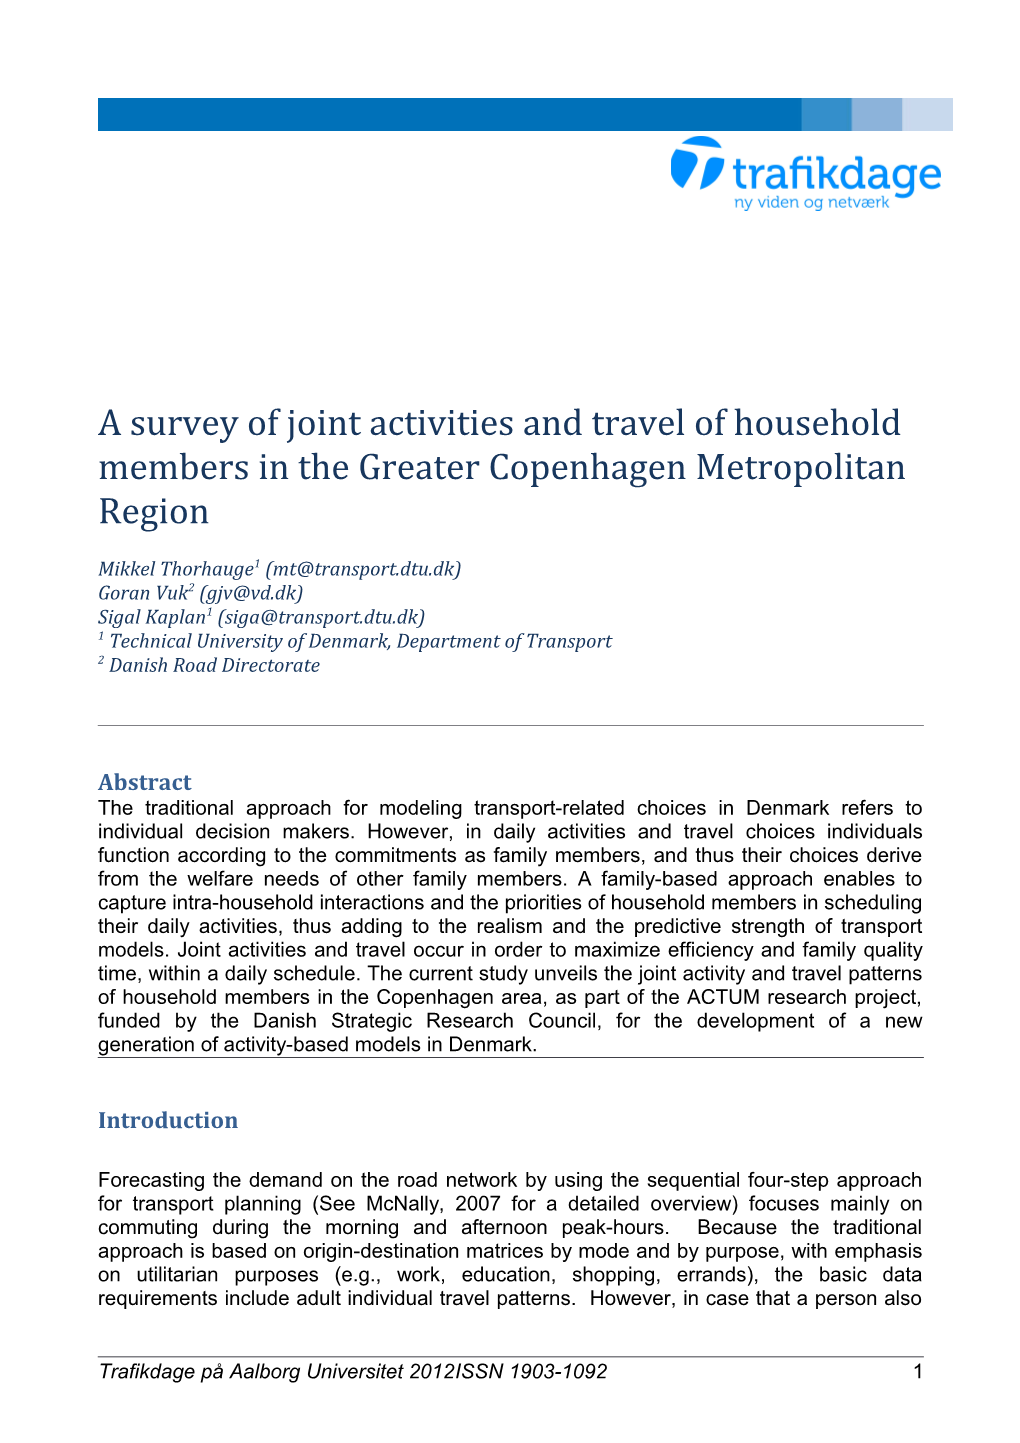 A Survey of Joint Activities and Travel of Householdmembers in the Greater Copenhagen